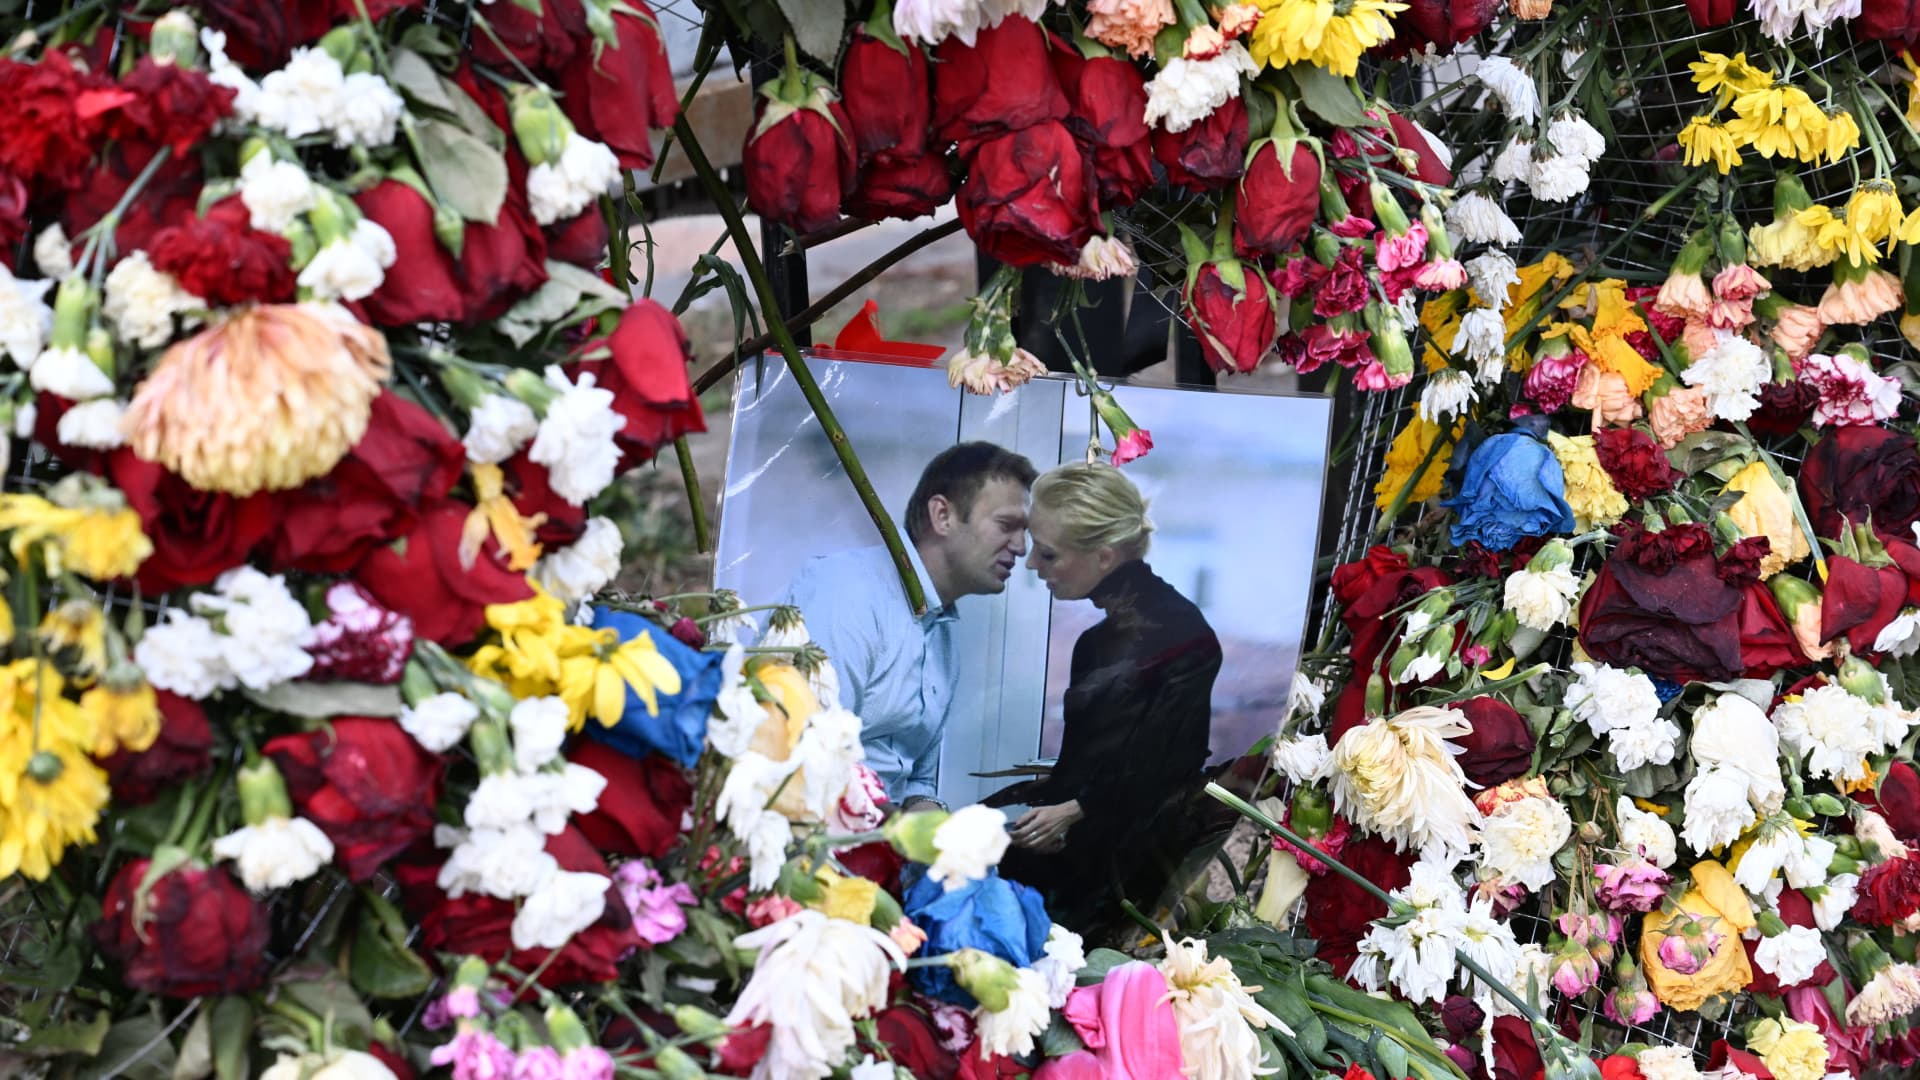 Putin likely did not specifically order Navalny’s killing, U.S. intelligence agencies conclude